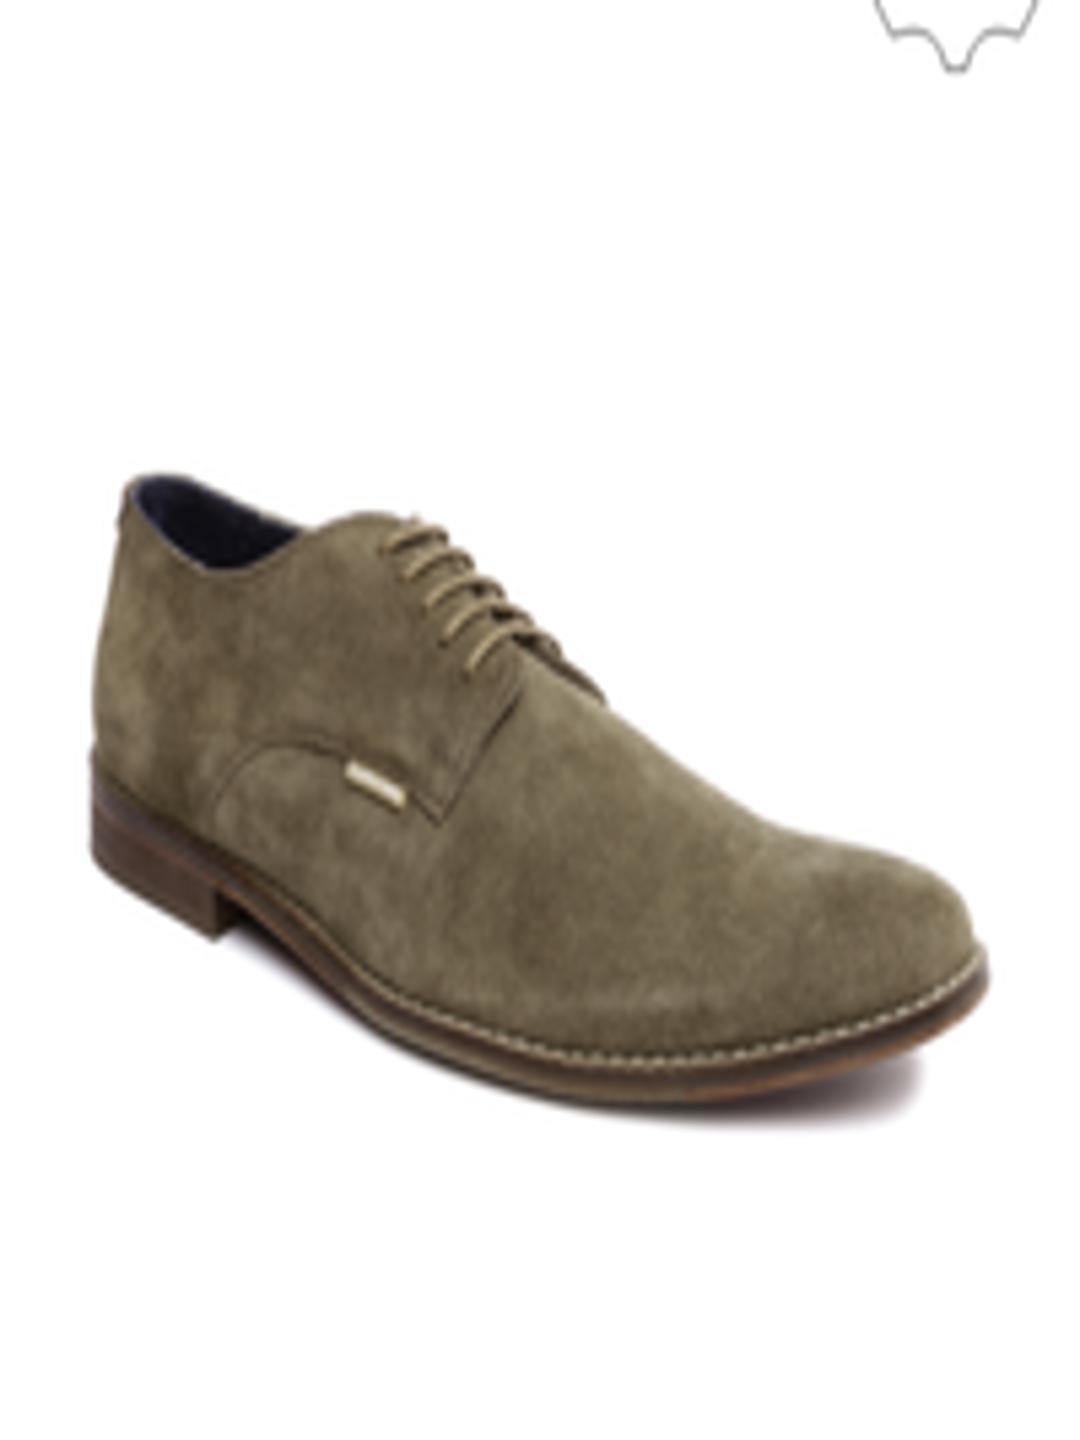 Buy U.S. Polo Assn. Men Olive Green Suede Casual Shoes - Casual Shoes ...